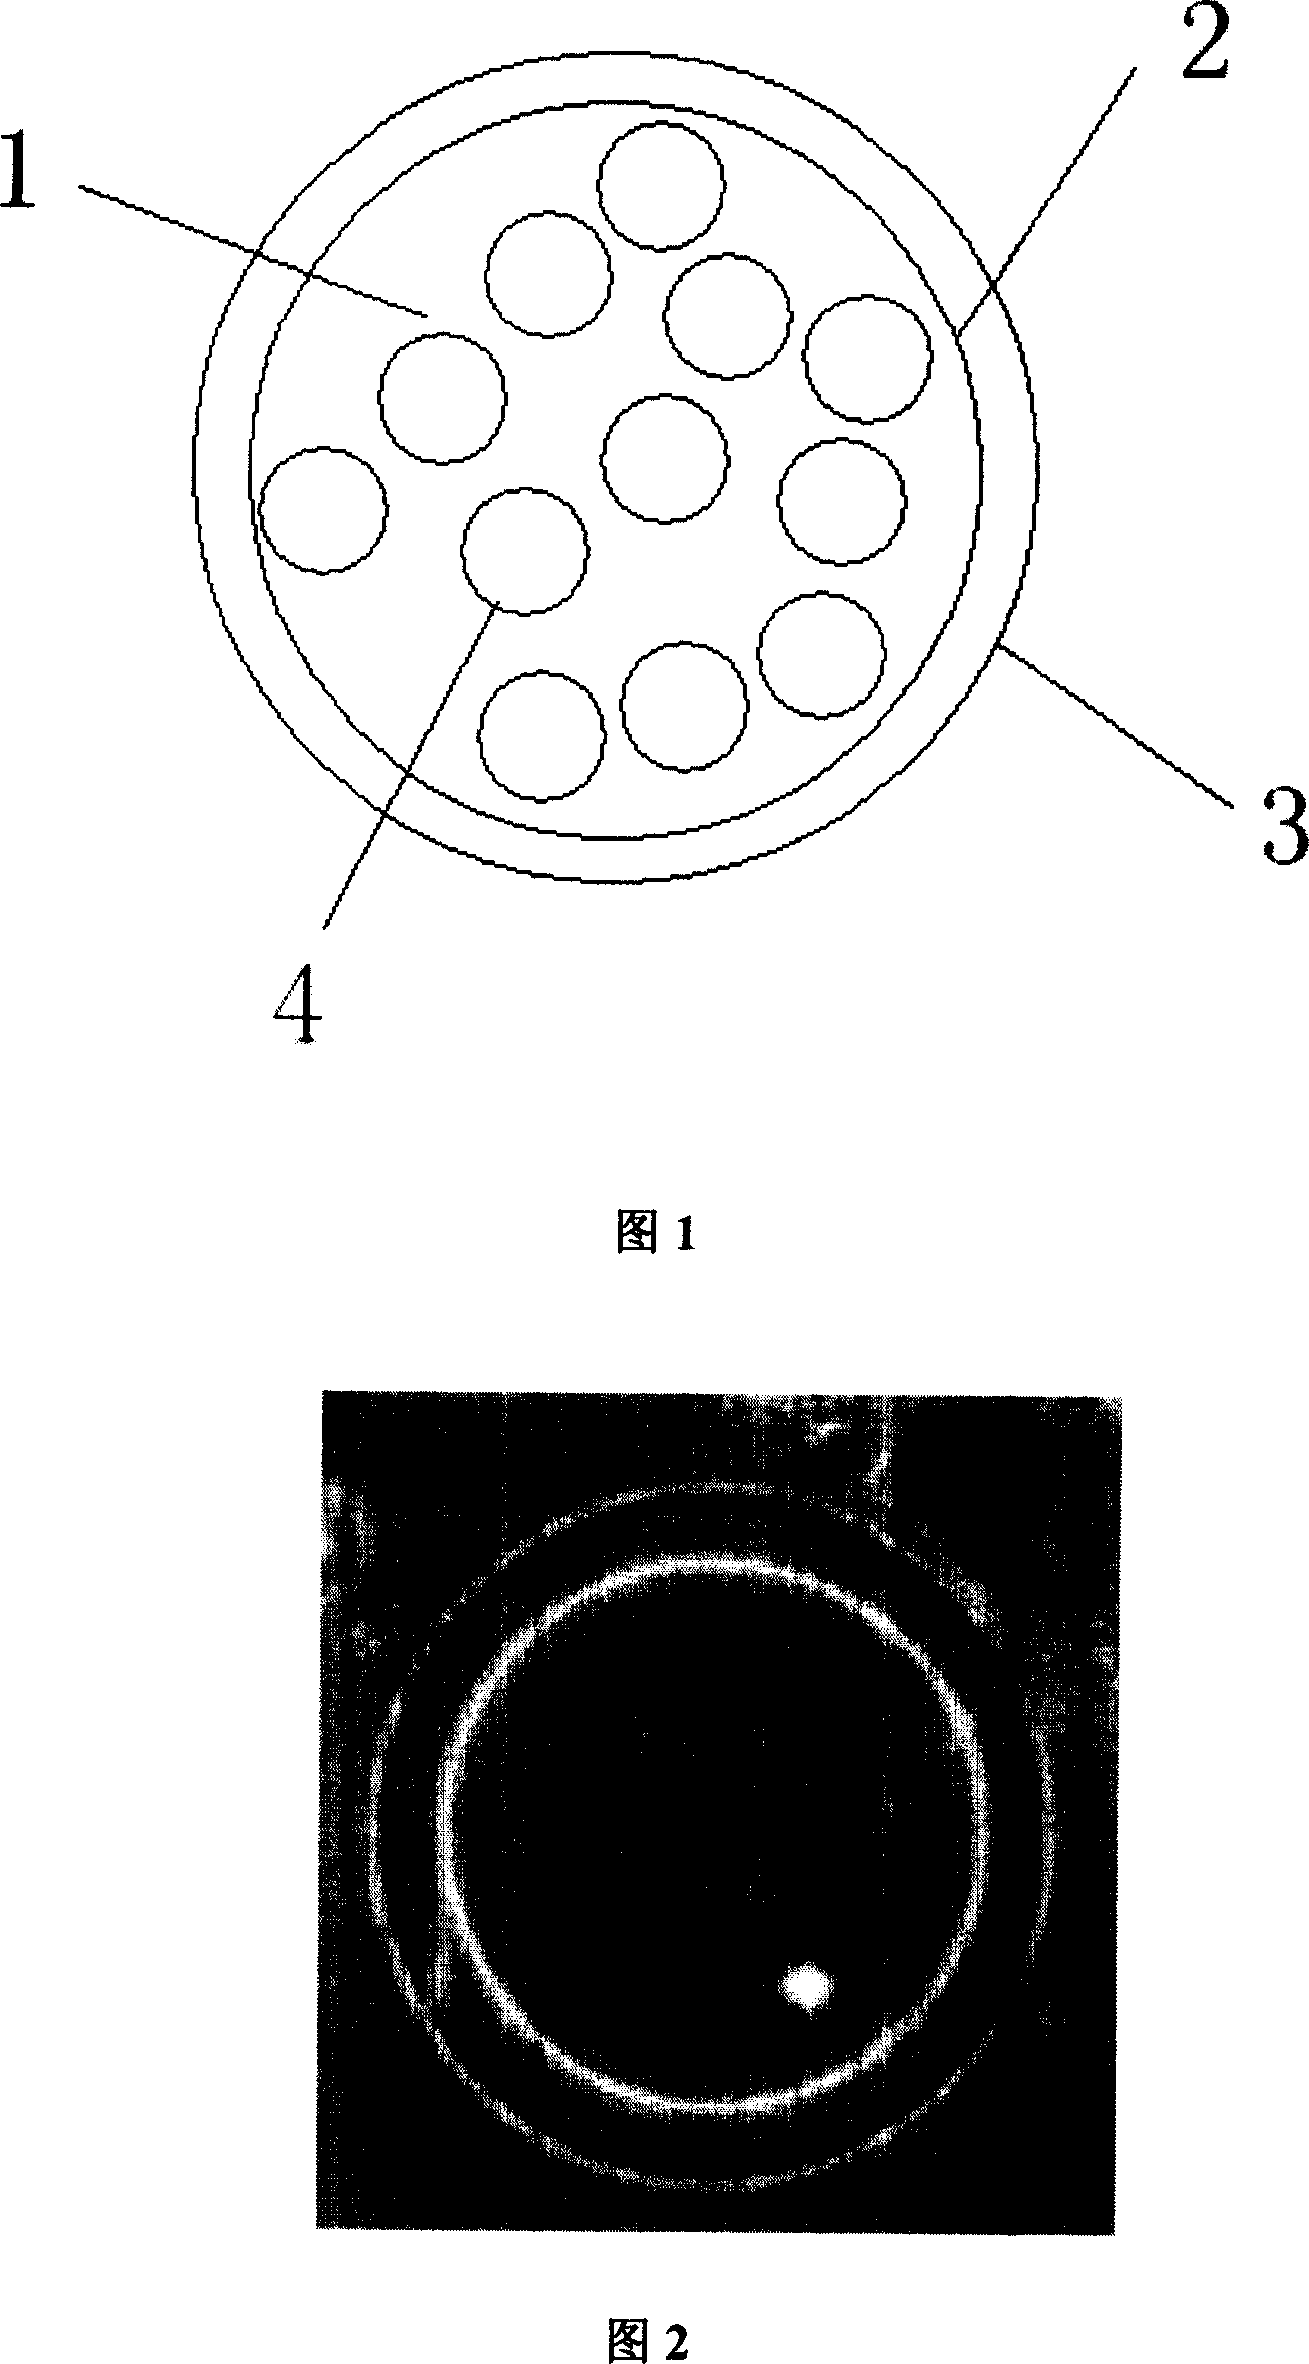 Method for producing liquid core microcapsule by electrostatic spraying